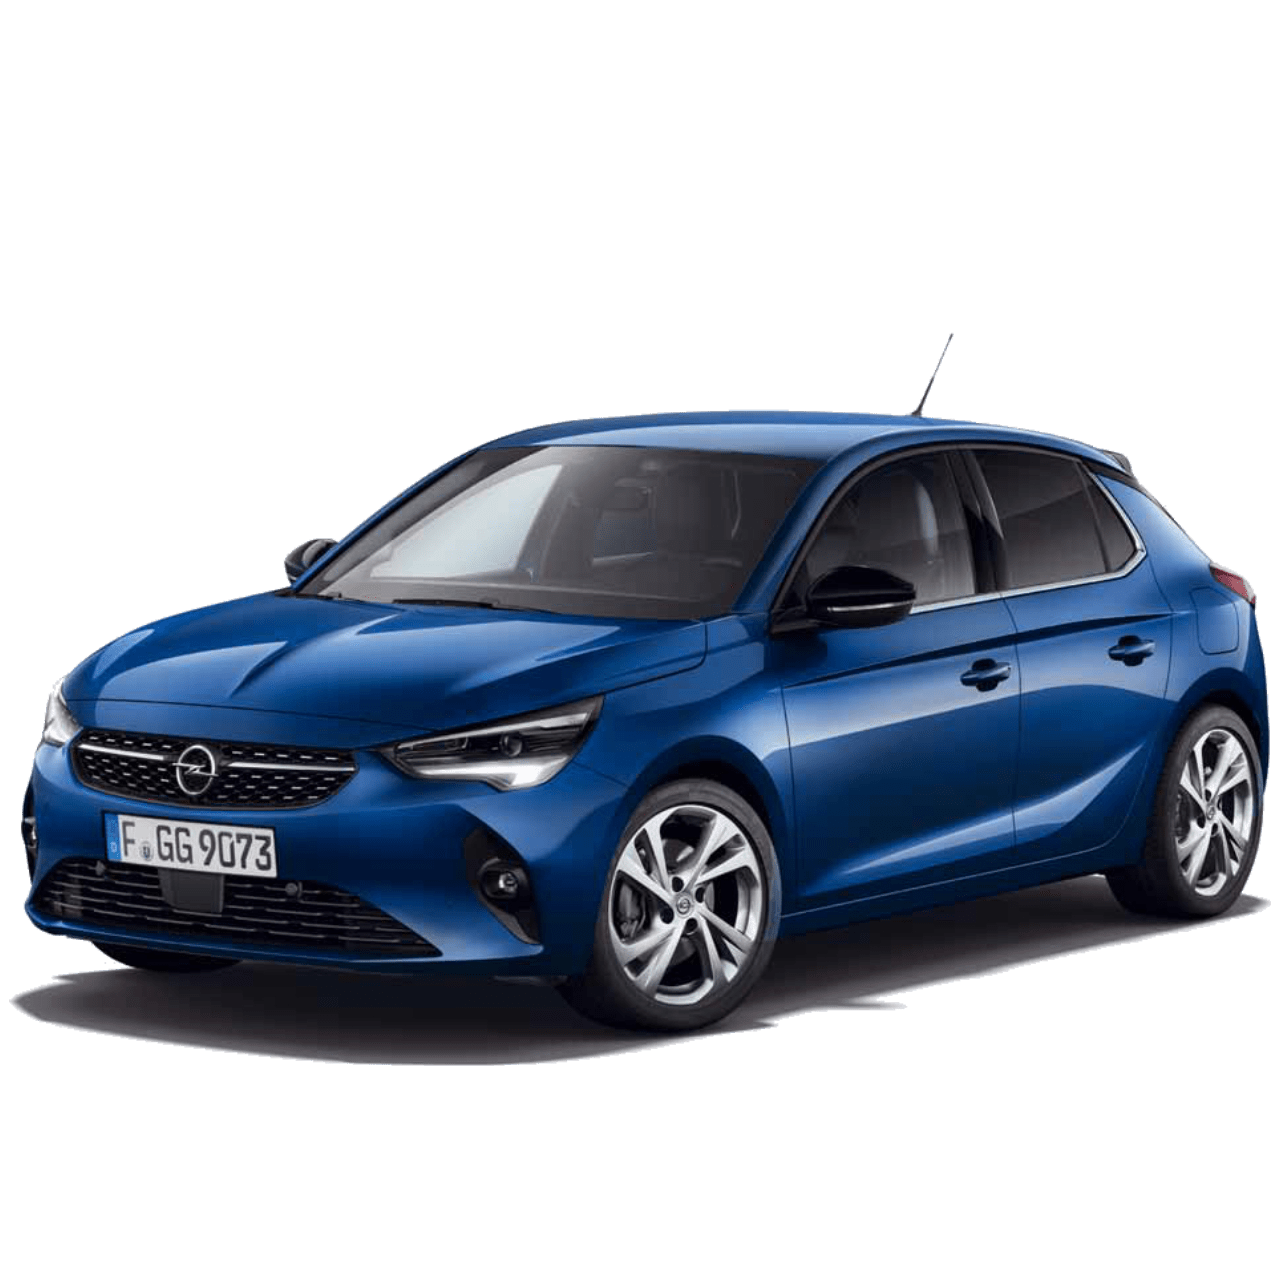 https://images.frandroid.com/wp-content/uploads/2020/06/opel-corsa-e-frandroid-2020.png